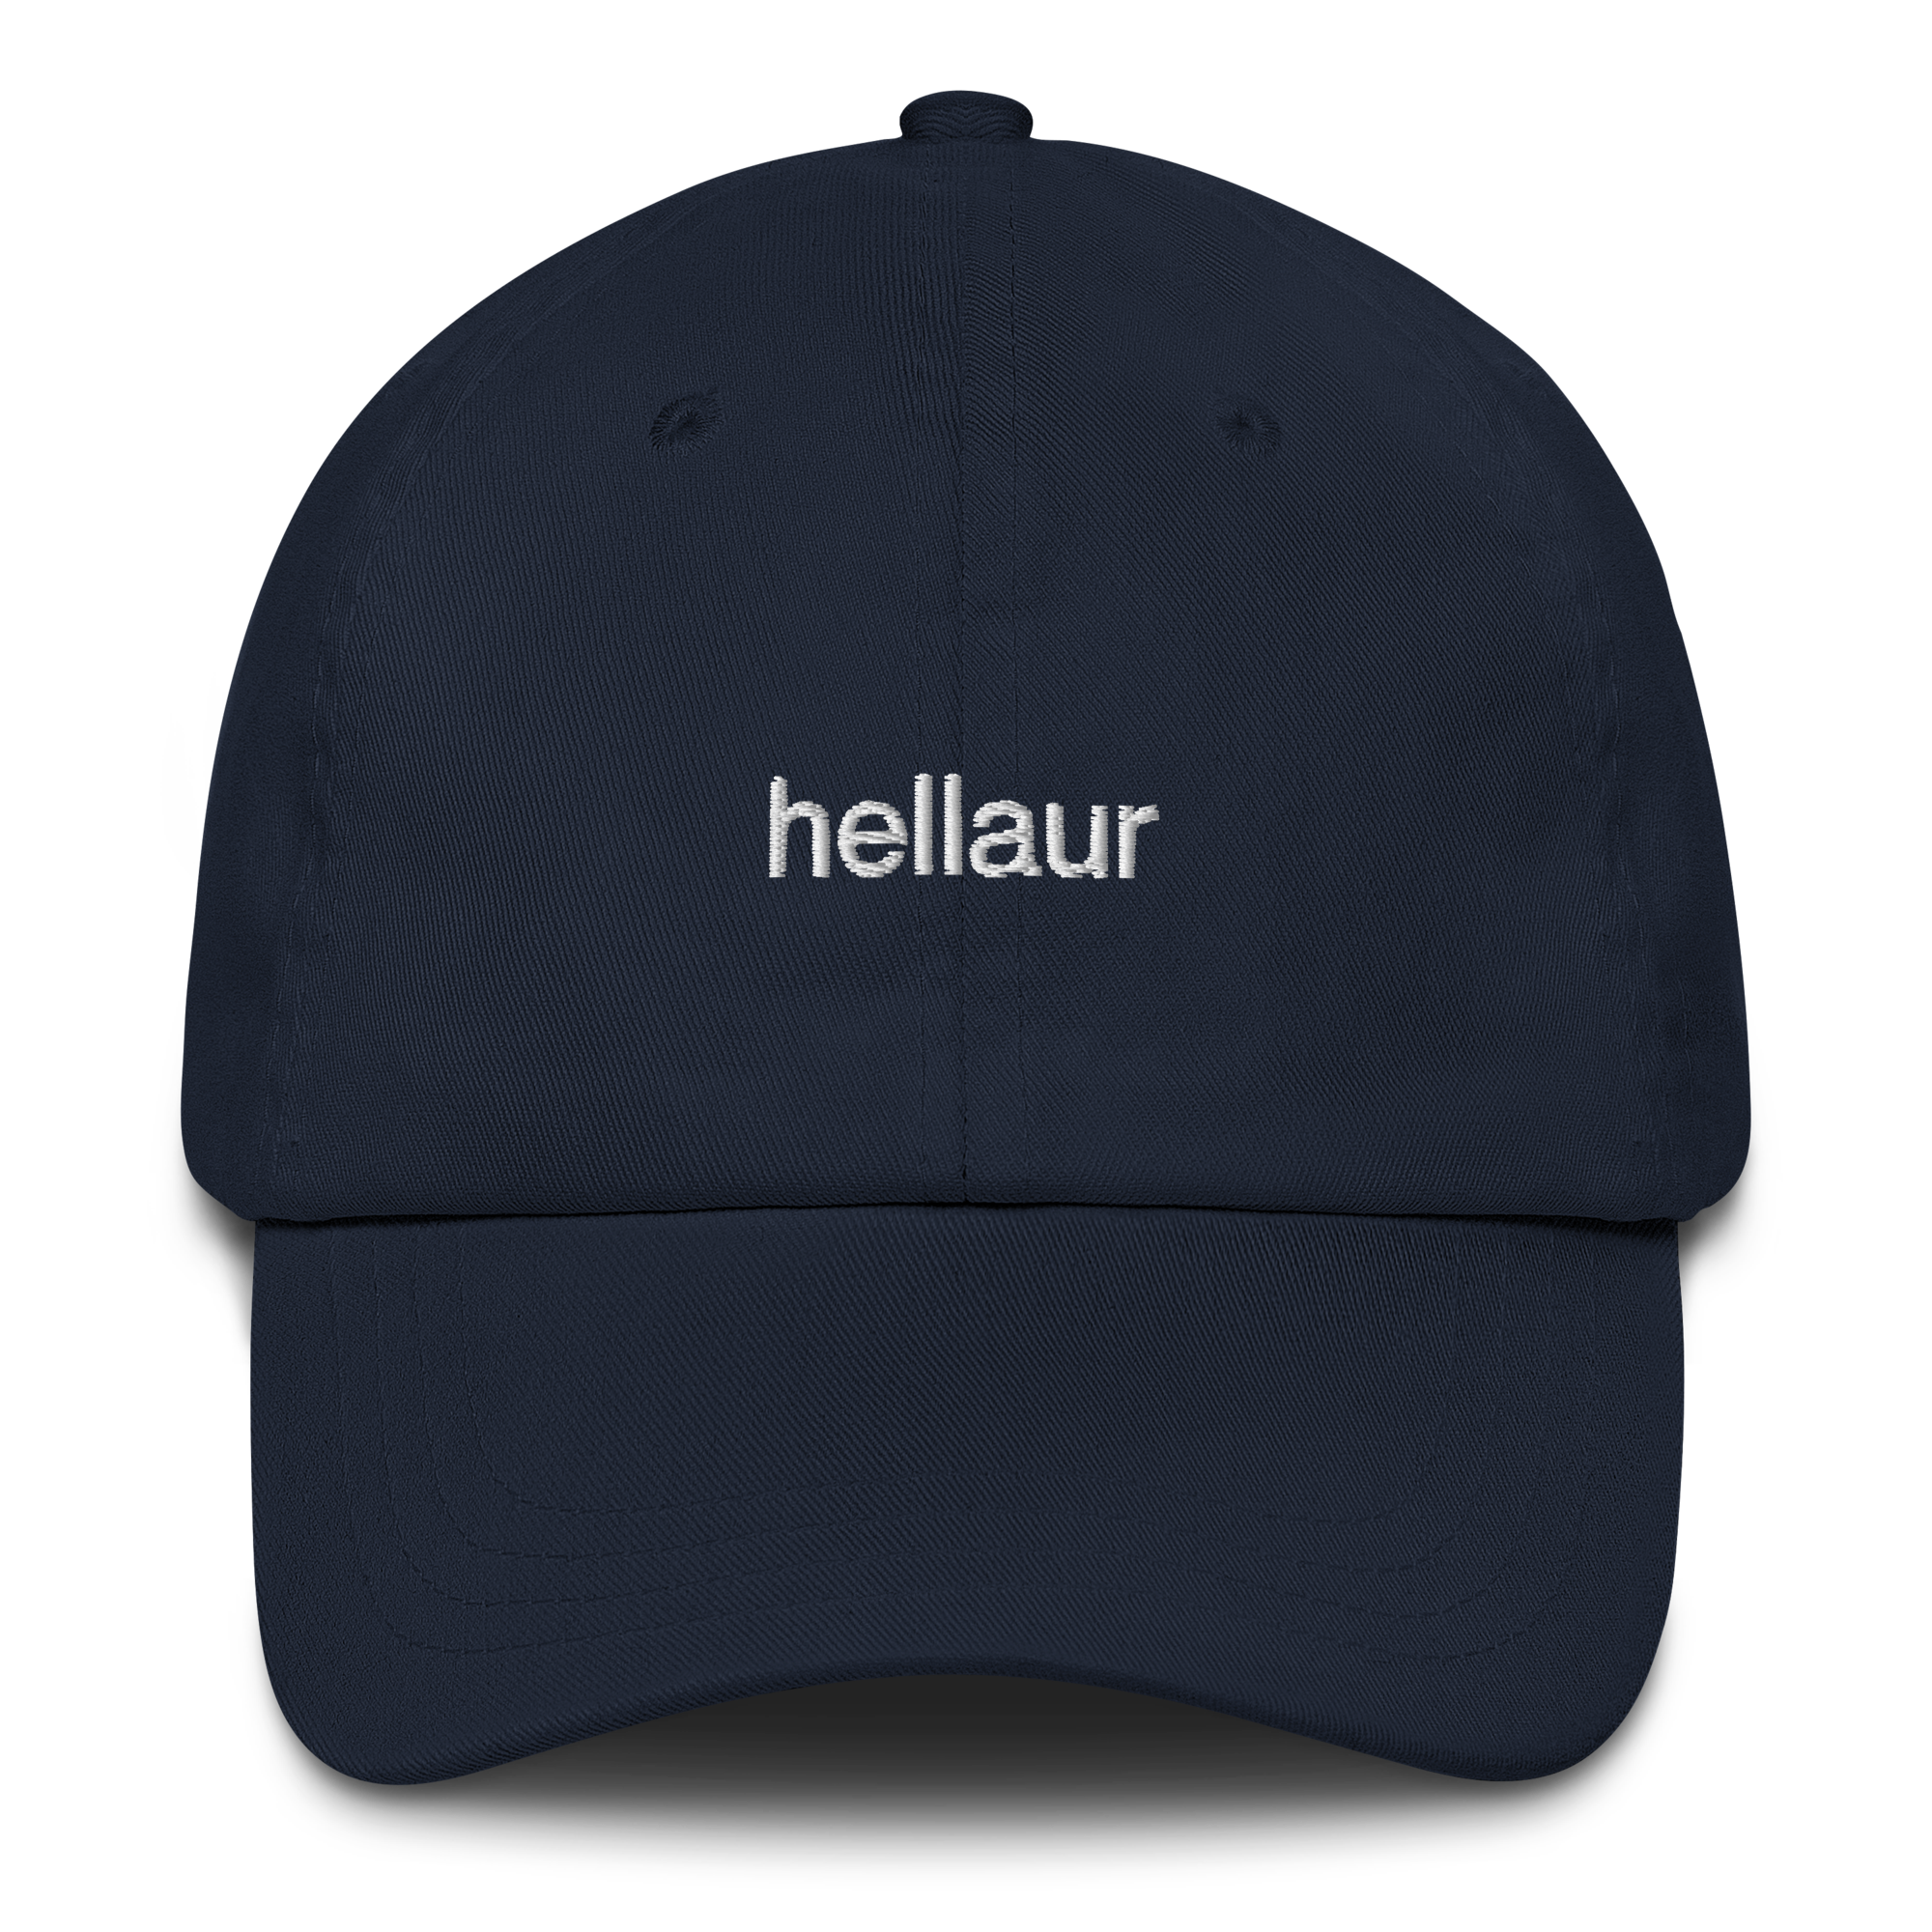 classic-dad-hat-navy-front-667eec16a6b0c.png